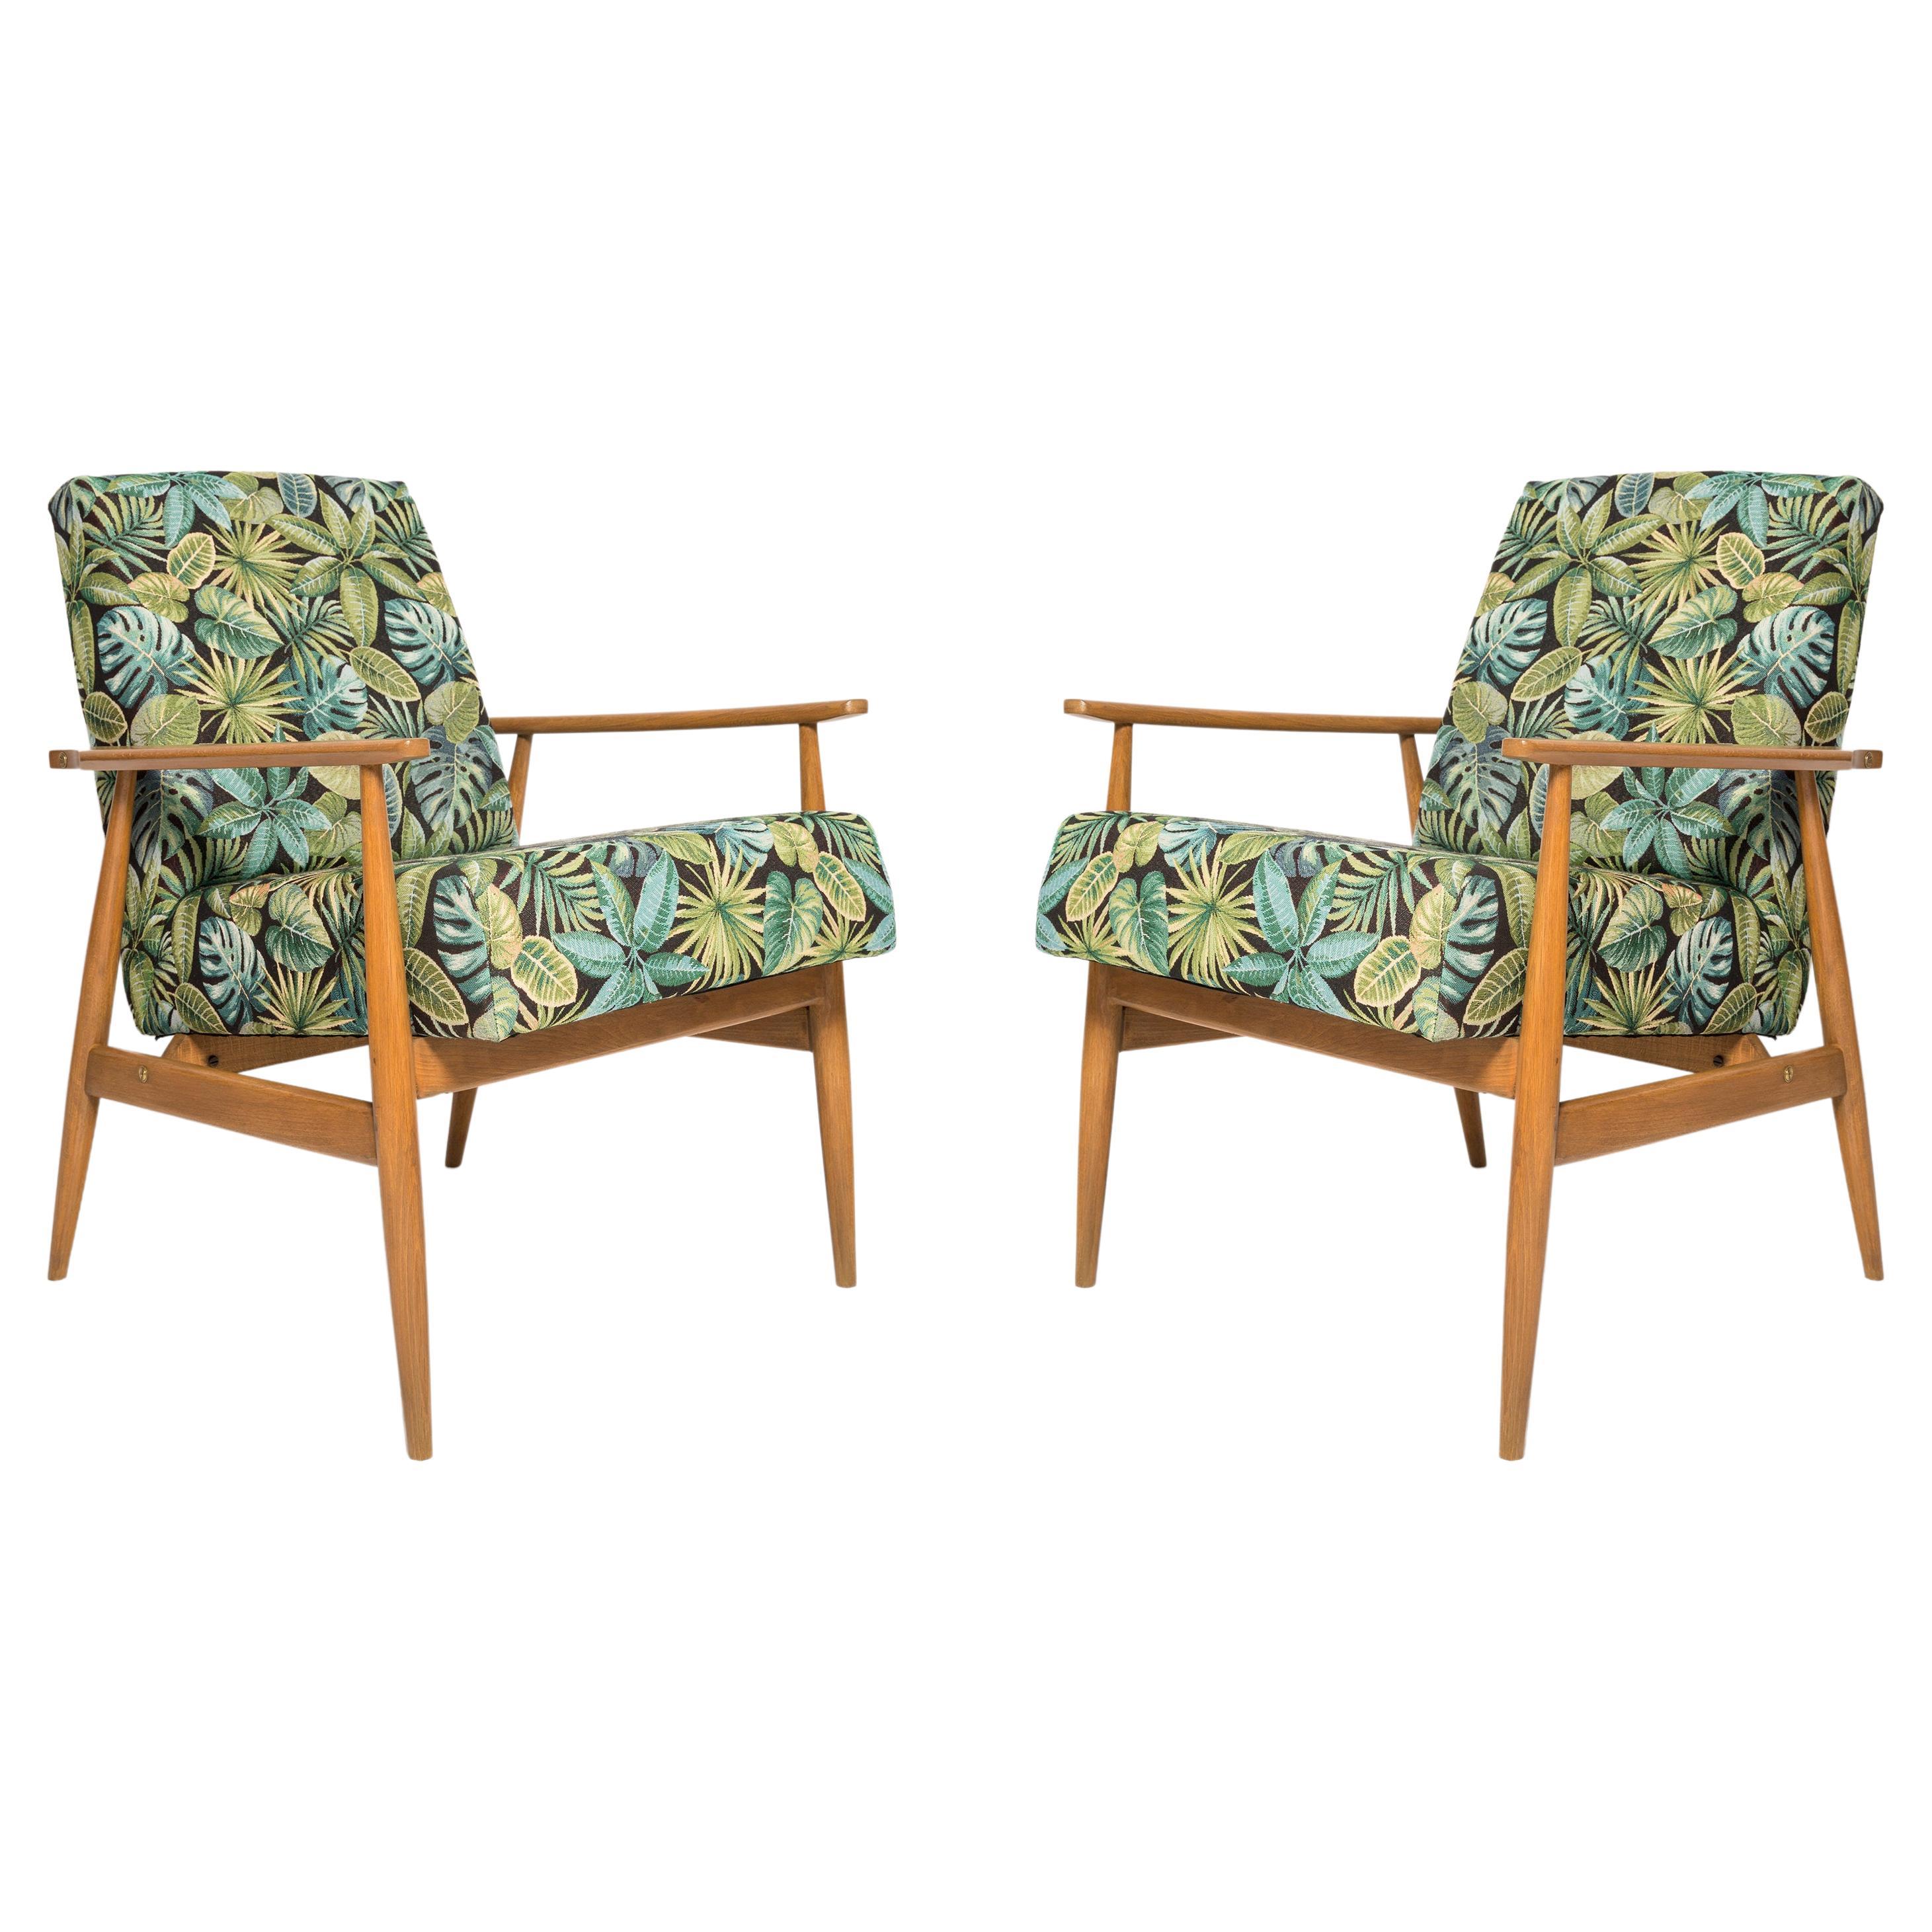 Pair of Mid-Century Green Leaves Jacquard Dante Armchairs, H. Lis, 1960s